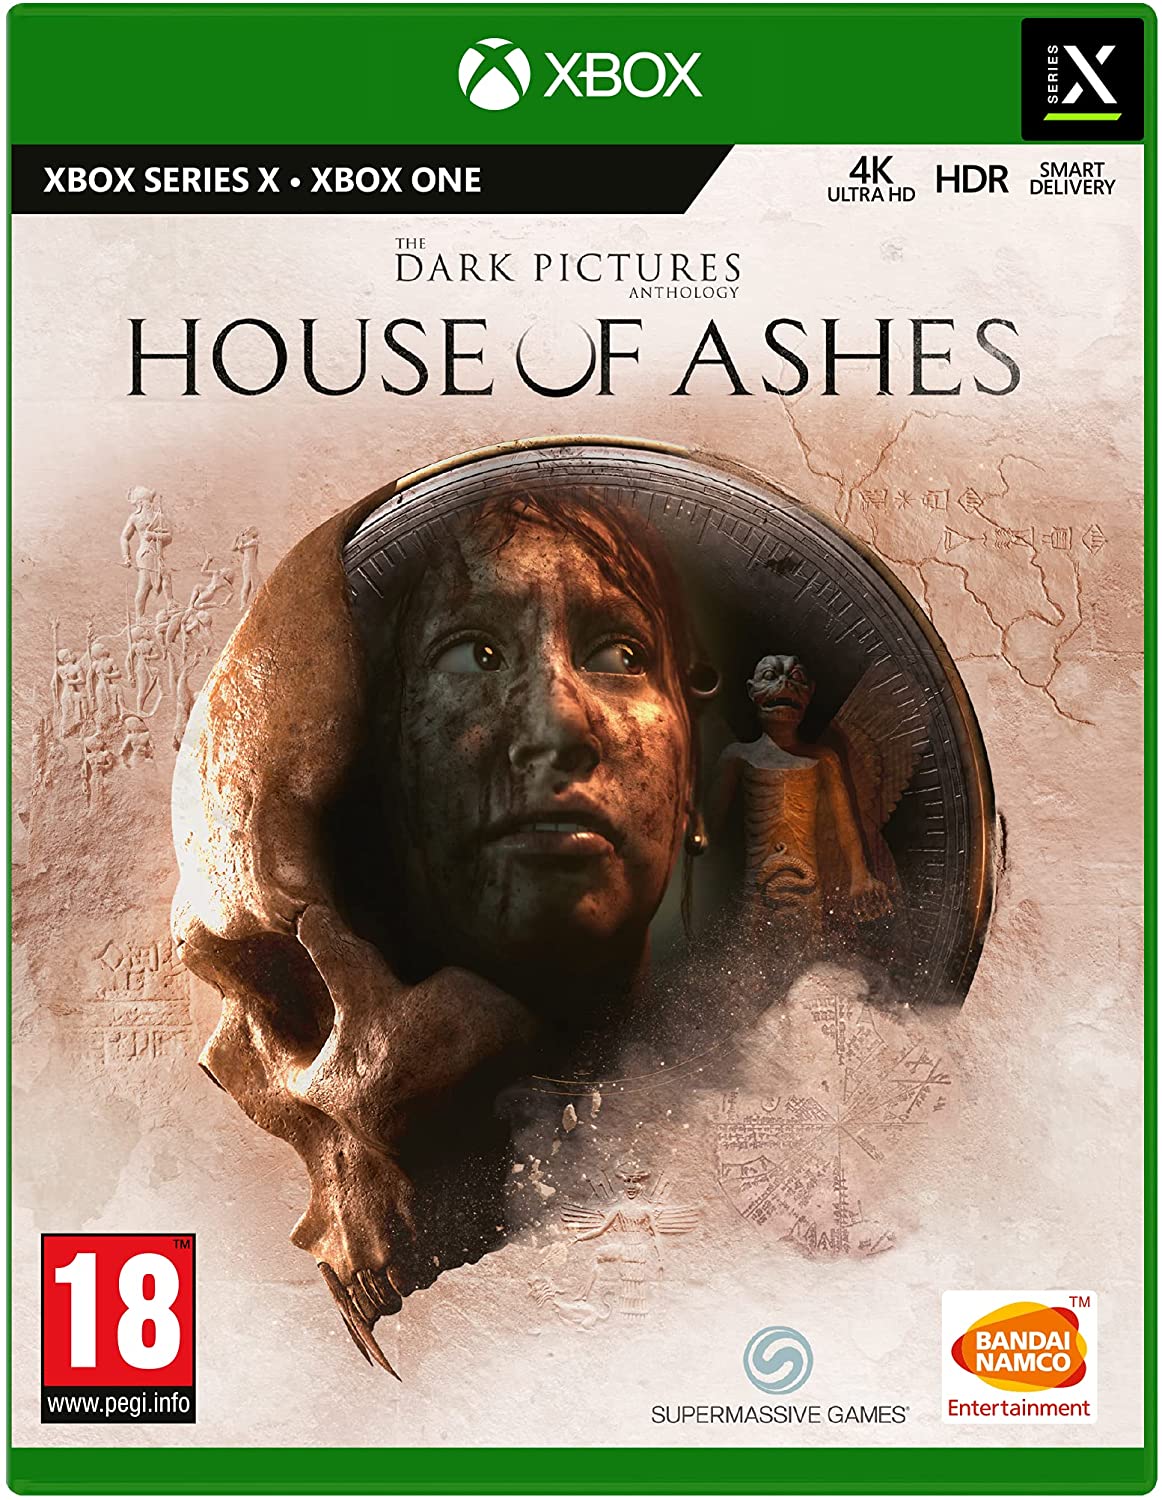 The Dark Pictures Anthology: House of Ashes Digital Download Key (Xbox One/Series X): USA